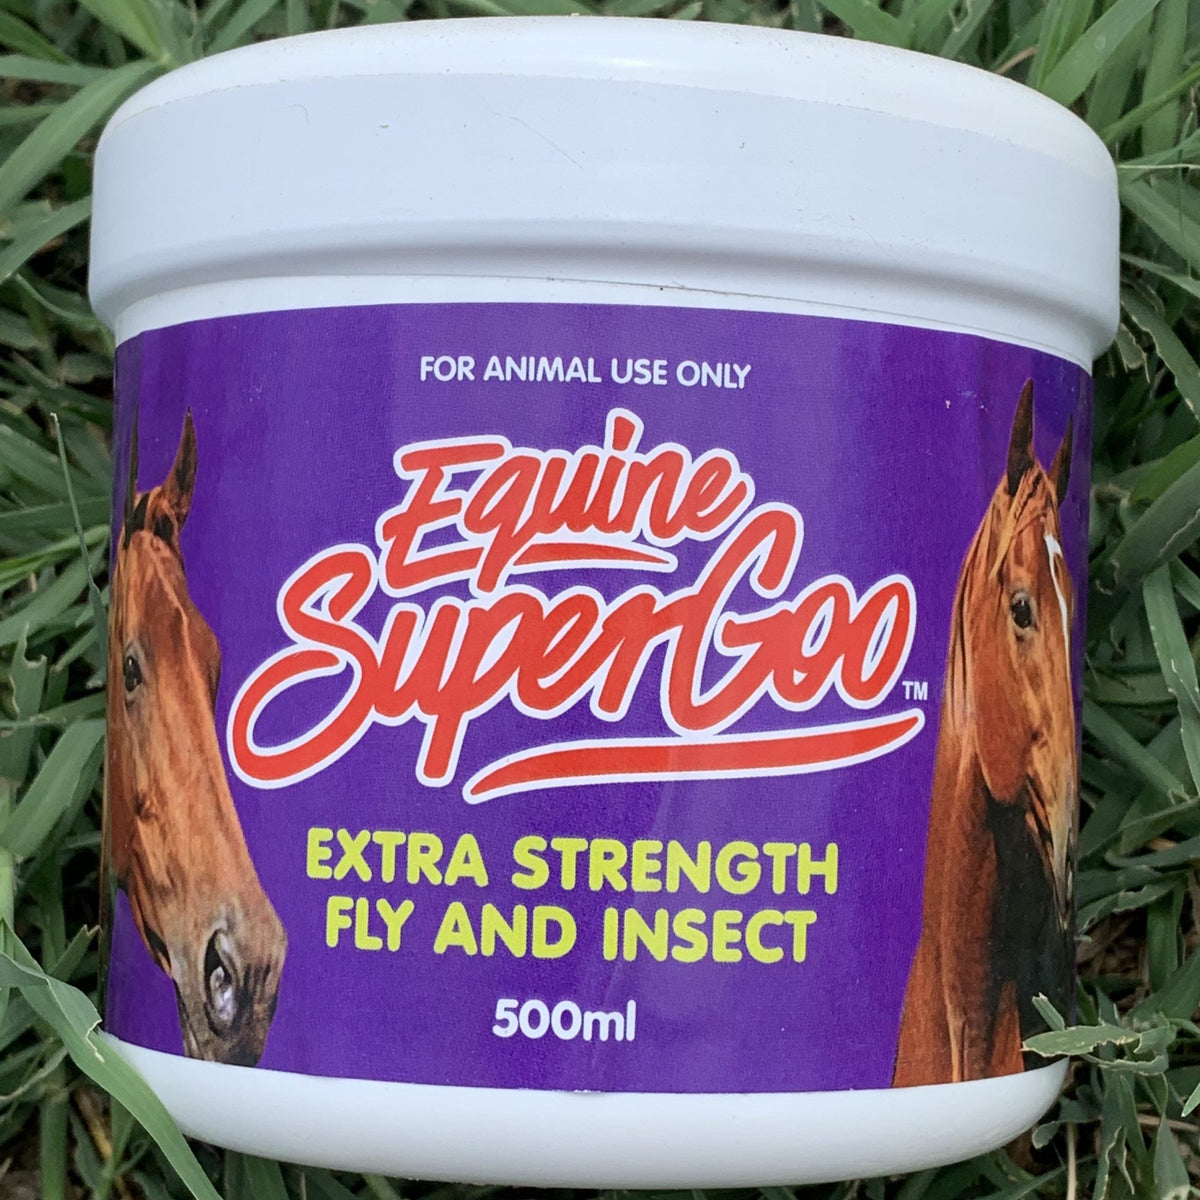 Equine Super Goo Extra Strength Natural Insect Repellent